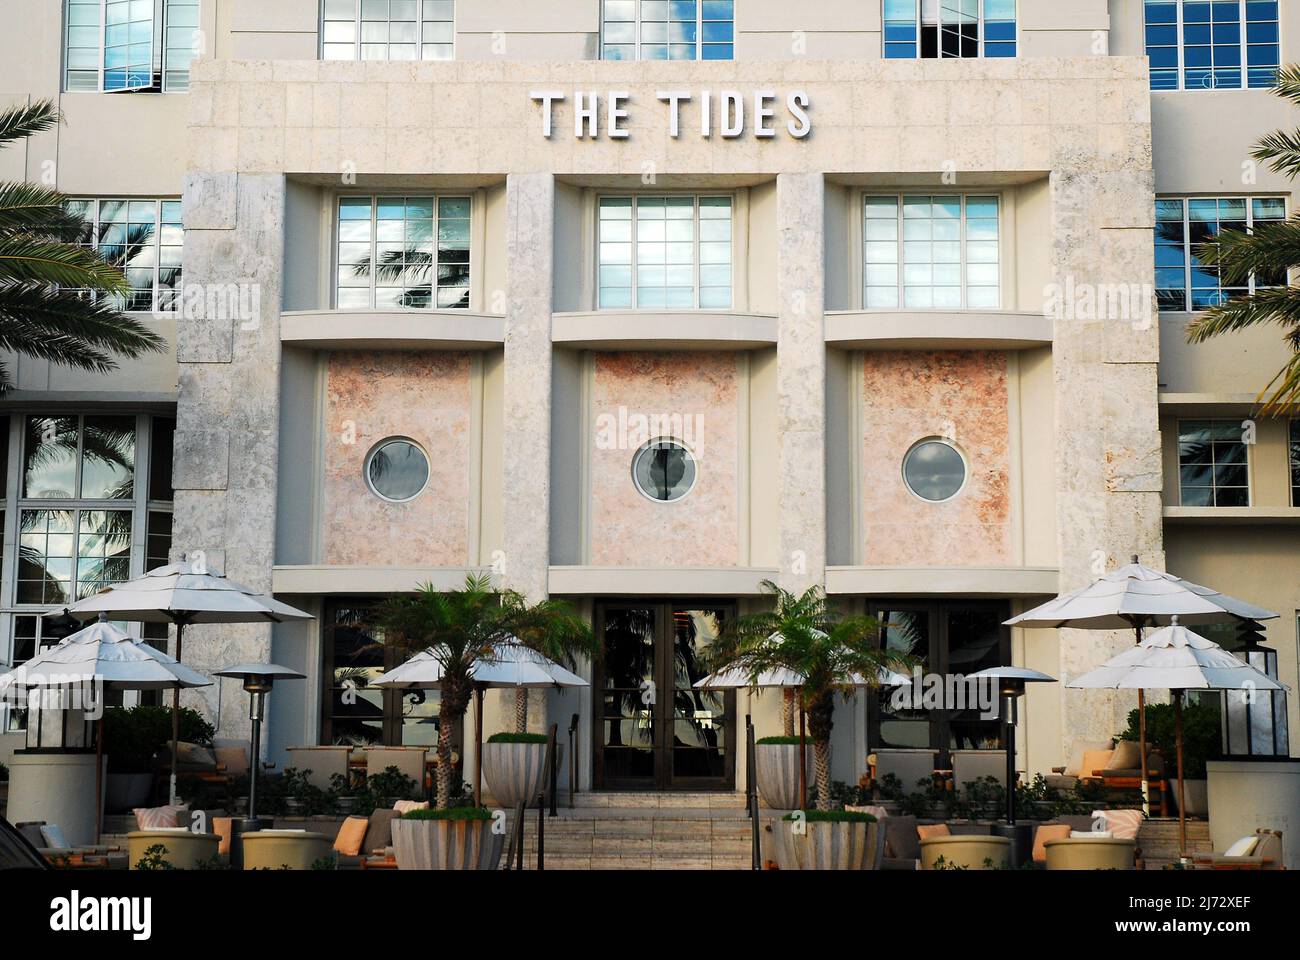 The Tides Hotel, South Beach, Miami Beach Banque D'Images